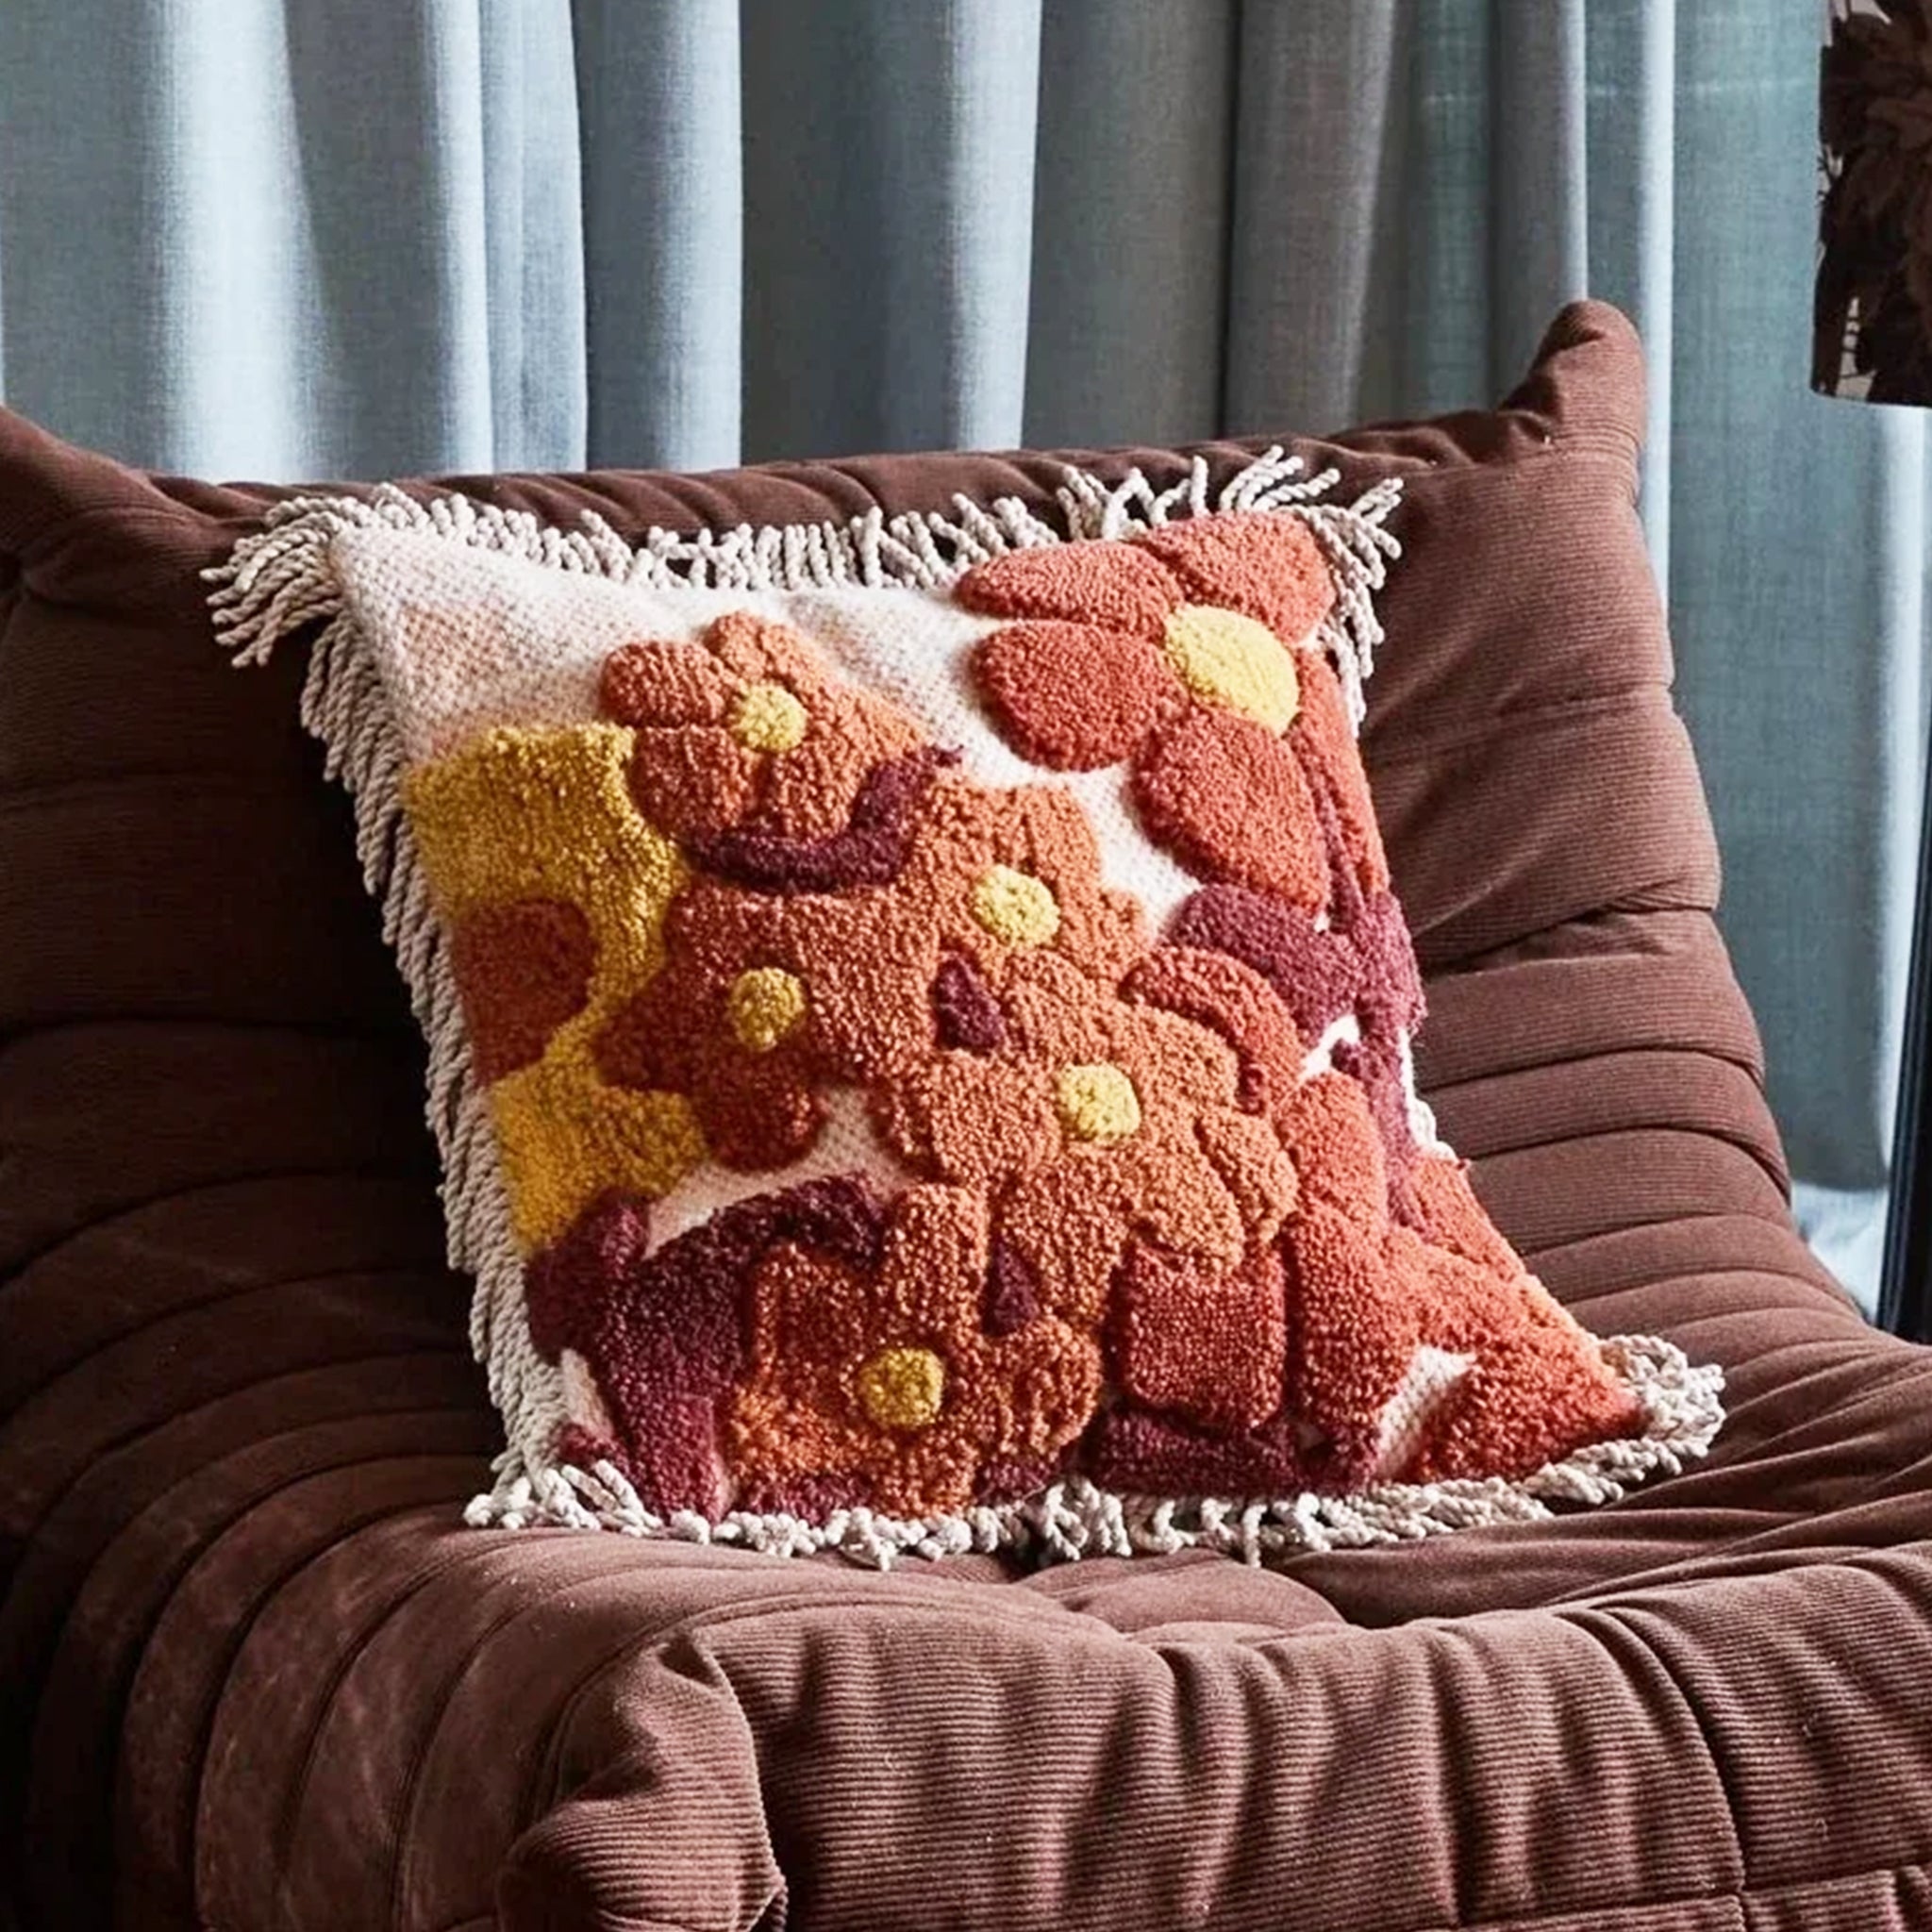 A brown, orange and yellow floral printed pillow with a fringe detail.